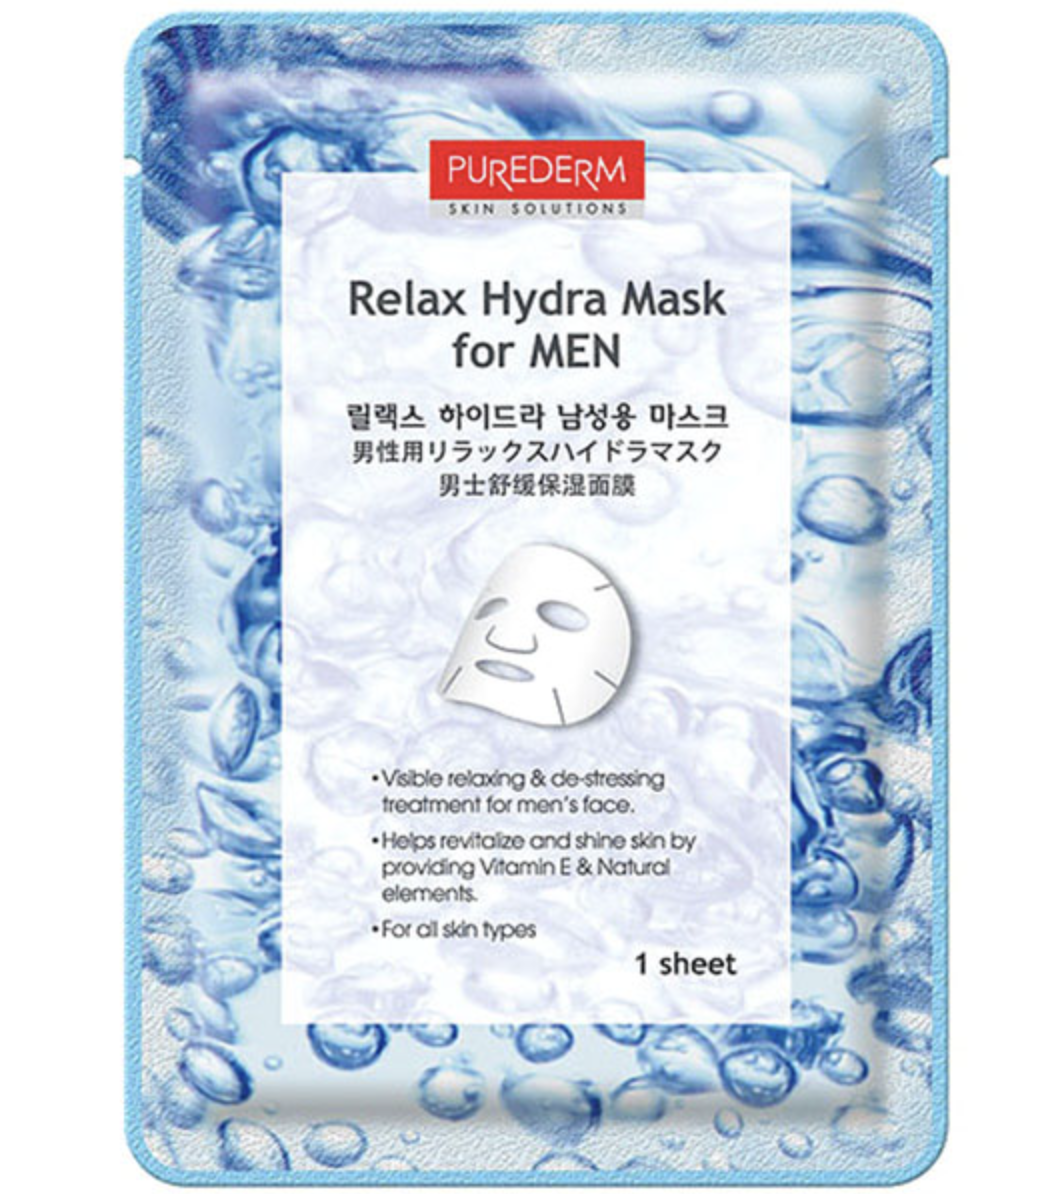 Purederm Relax Hydra Mask For Men